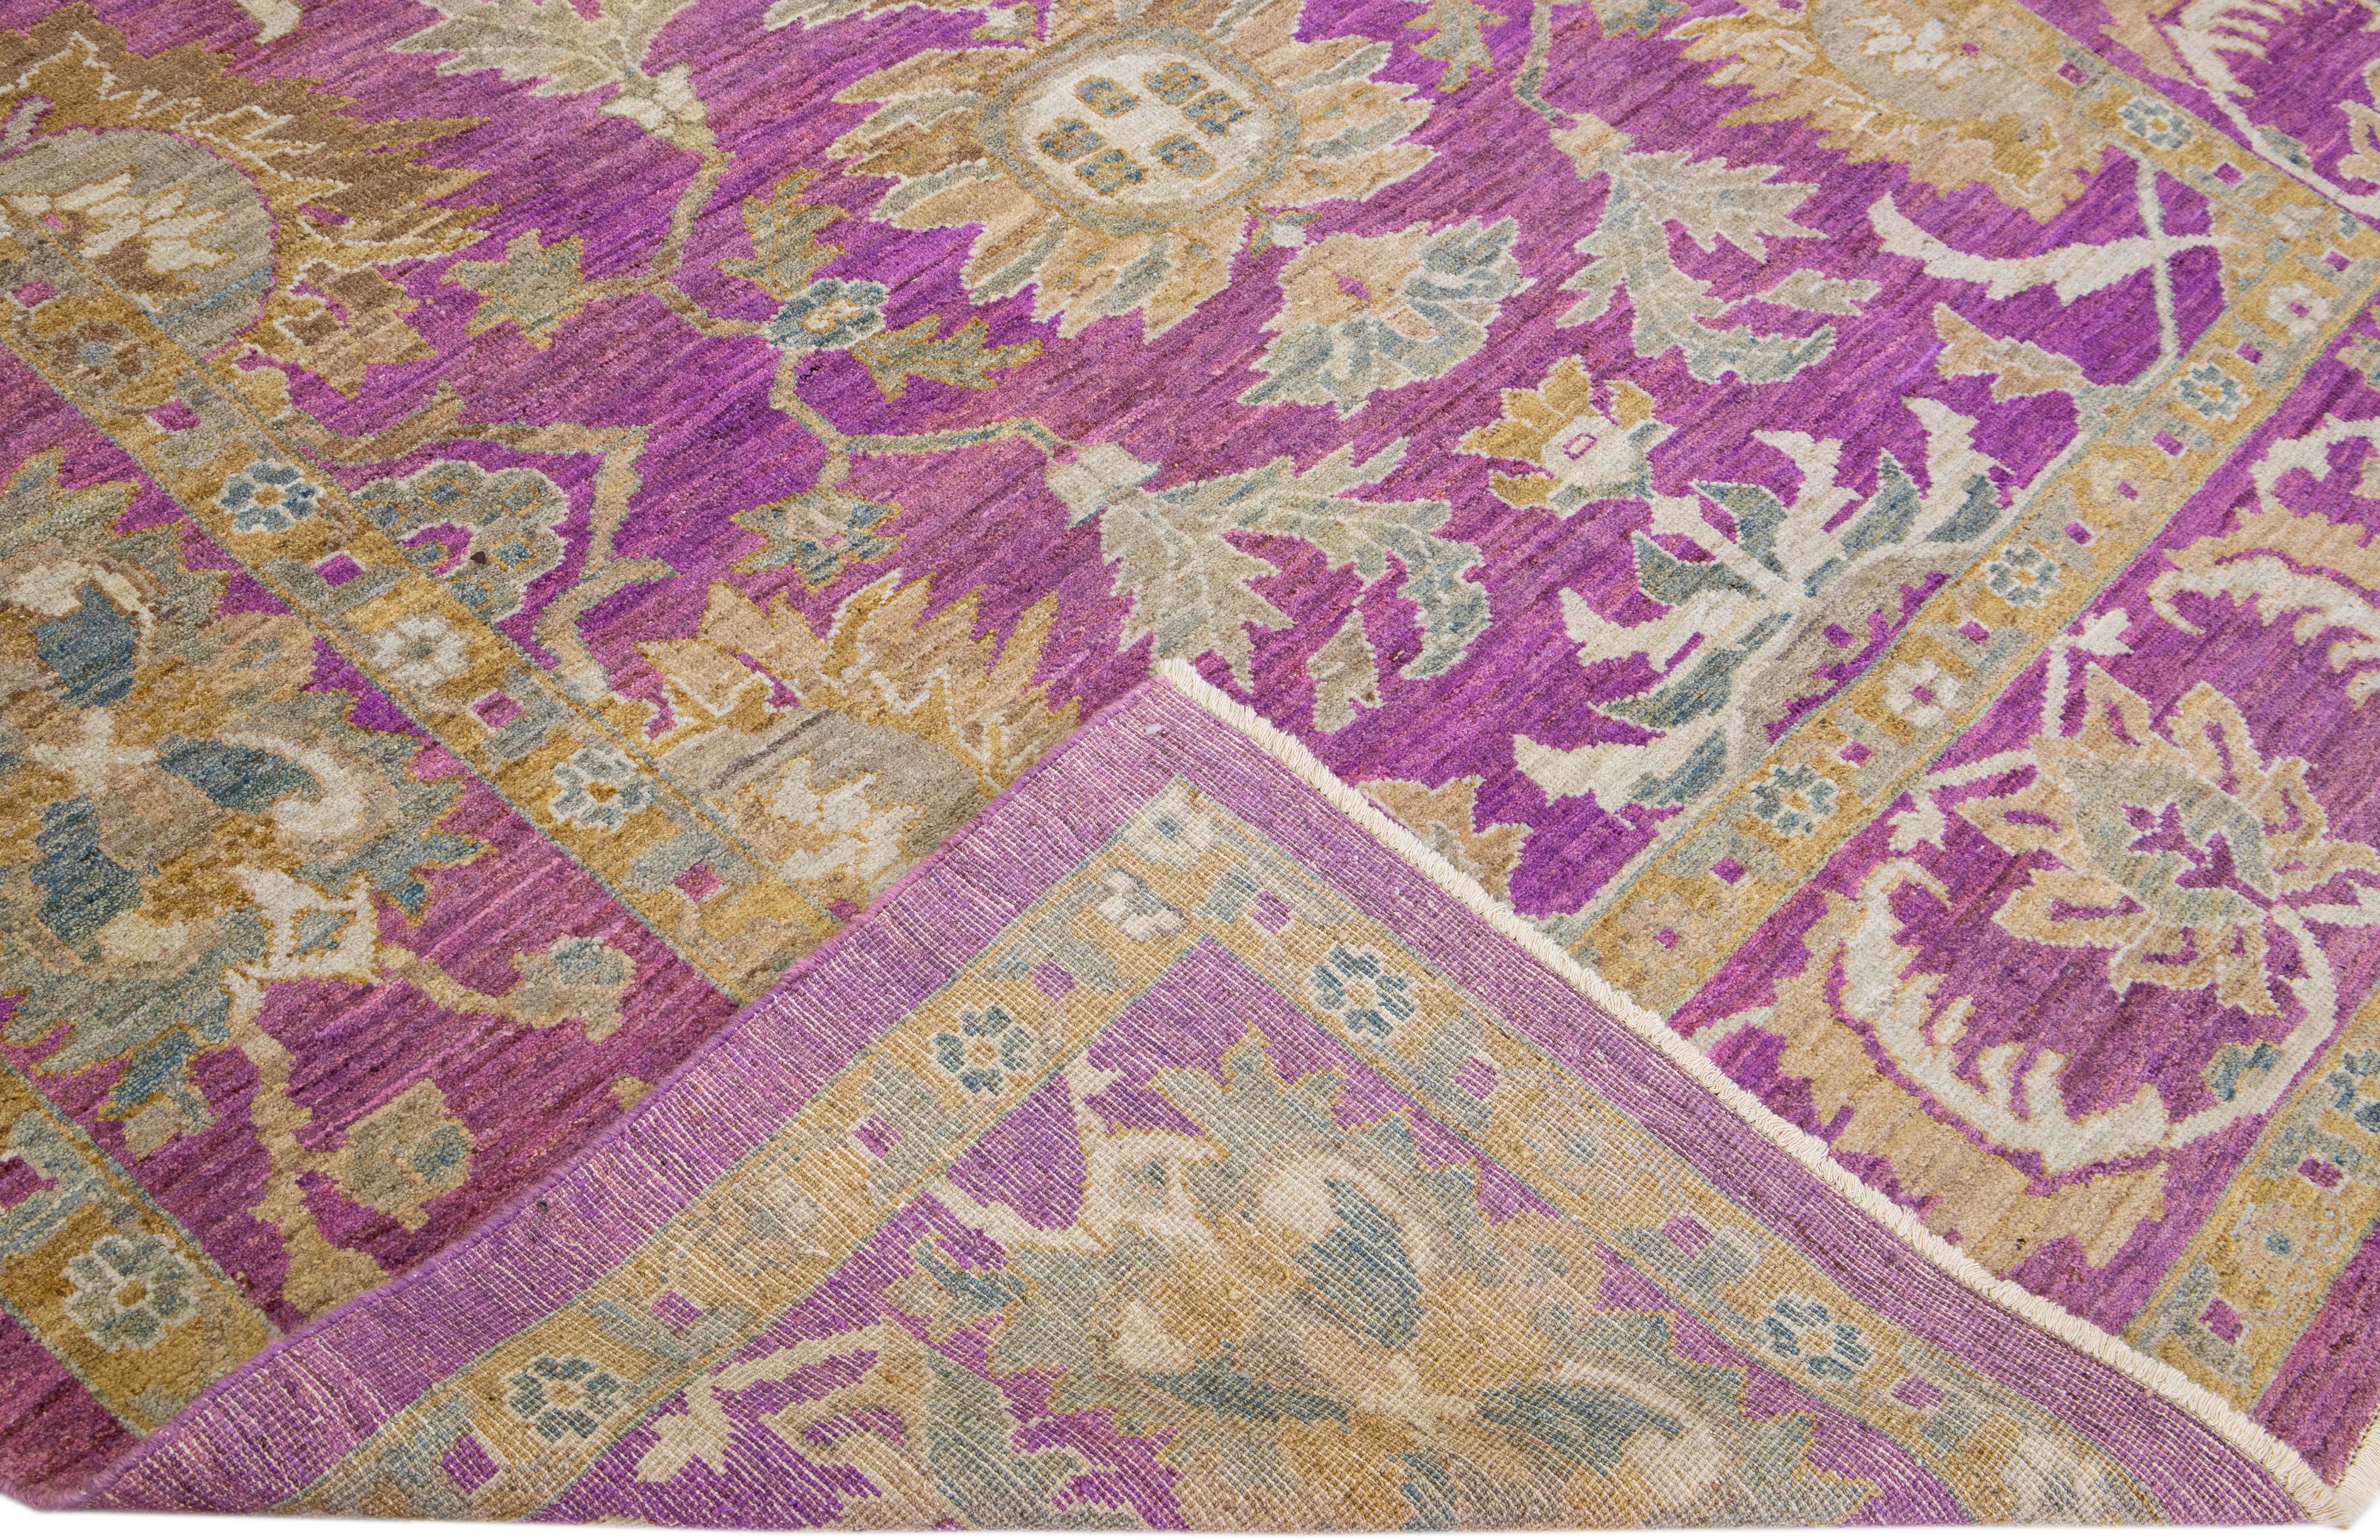 Beautiful hand-knotted Modern Mahal wool rug with the purple field. This Persian rug has ivory and brown accents featuring an all-over traditional floral pattern design. 

This rug measures 8' x 10'6